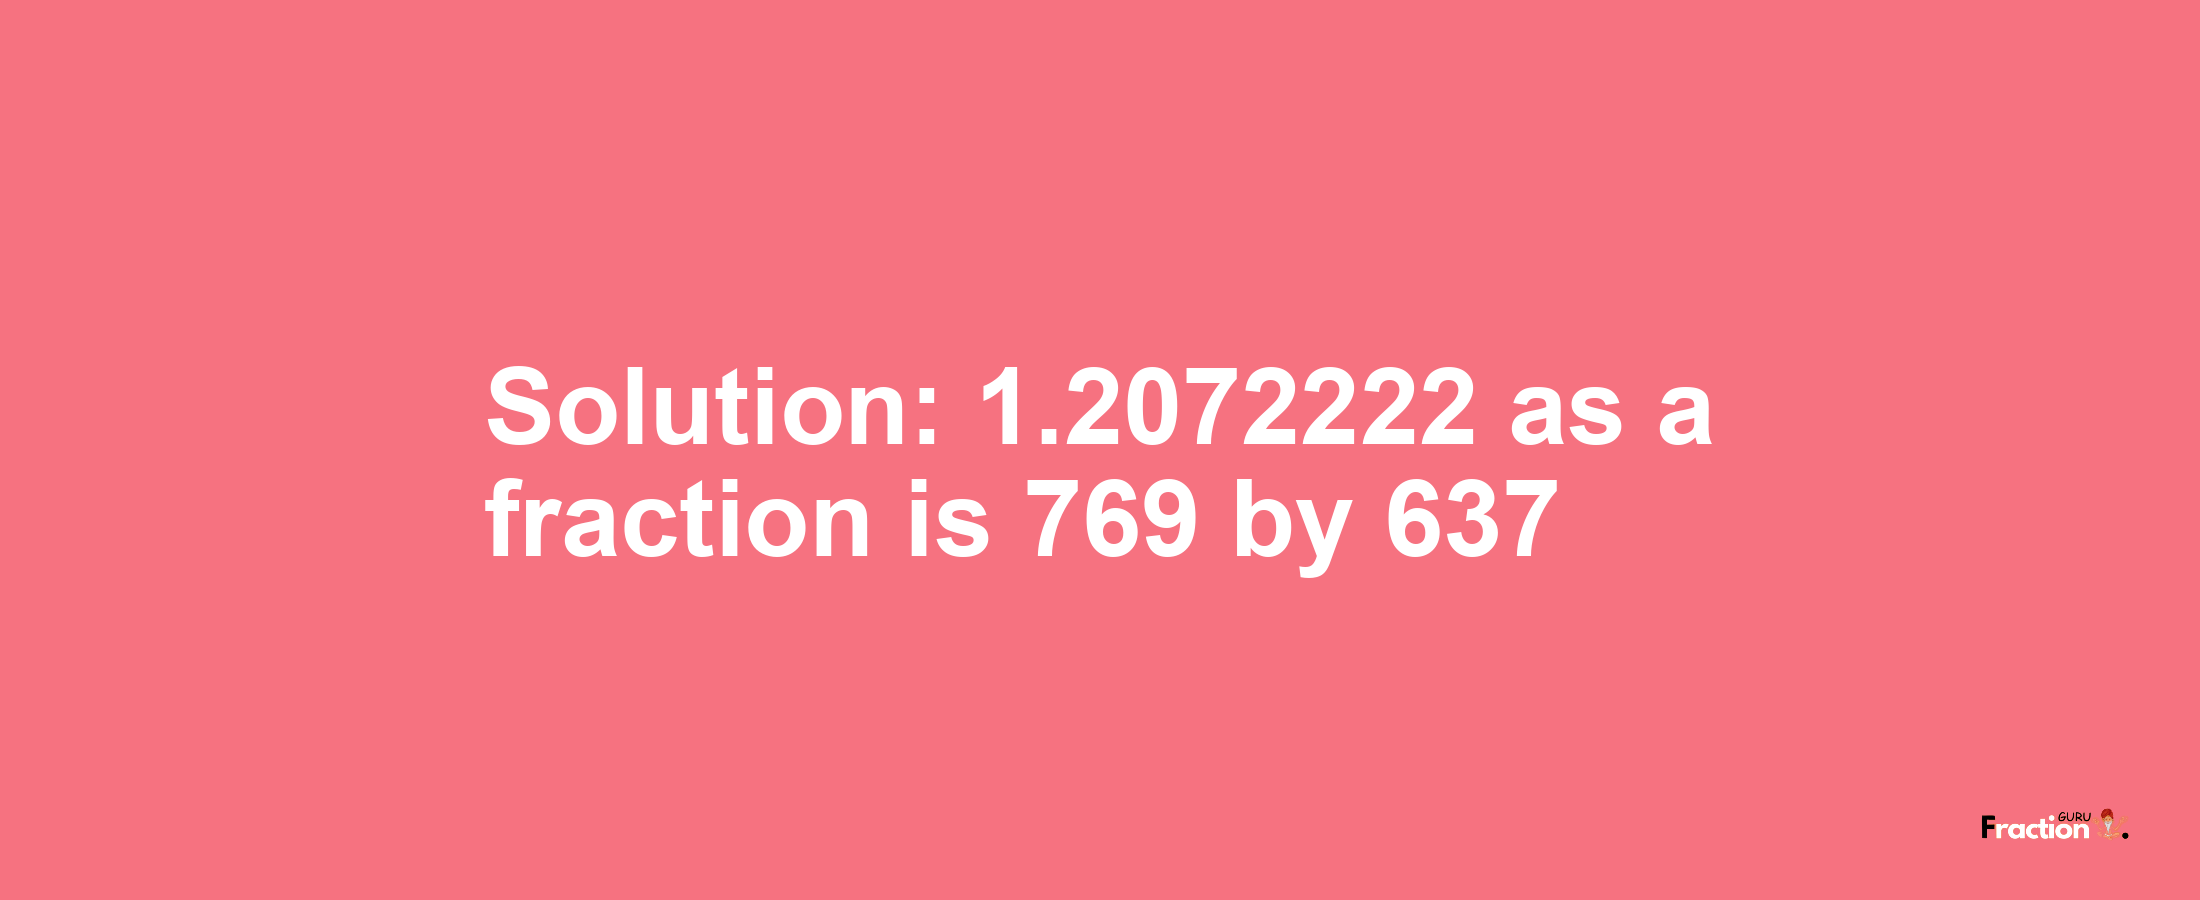 Solution:1.2072222 as a fraction is 769/637